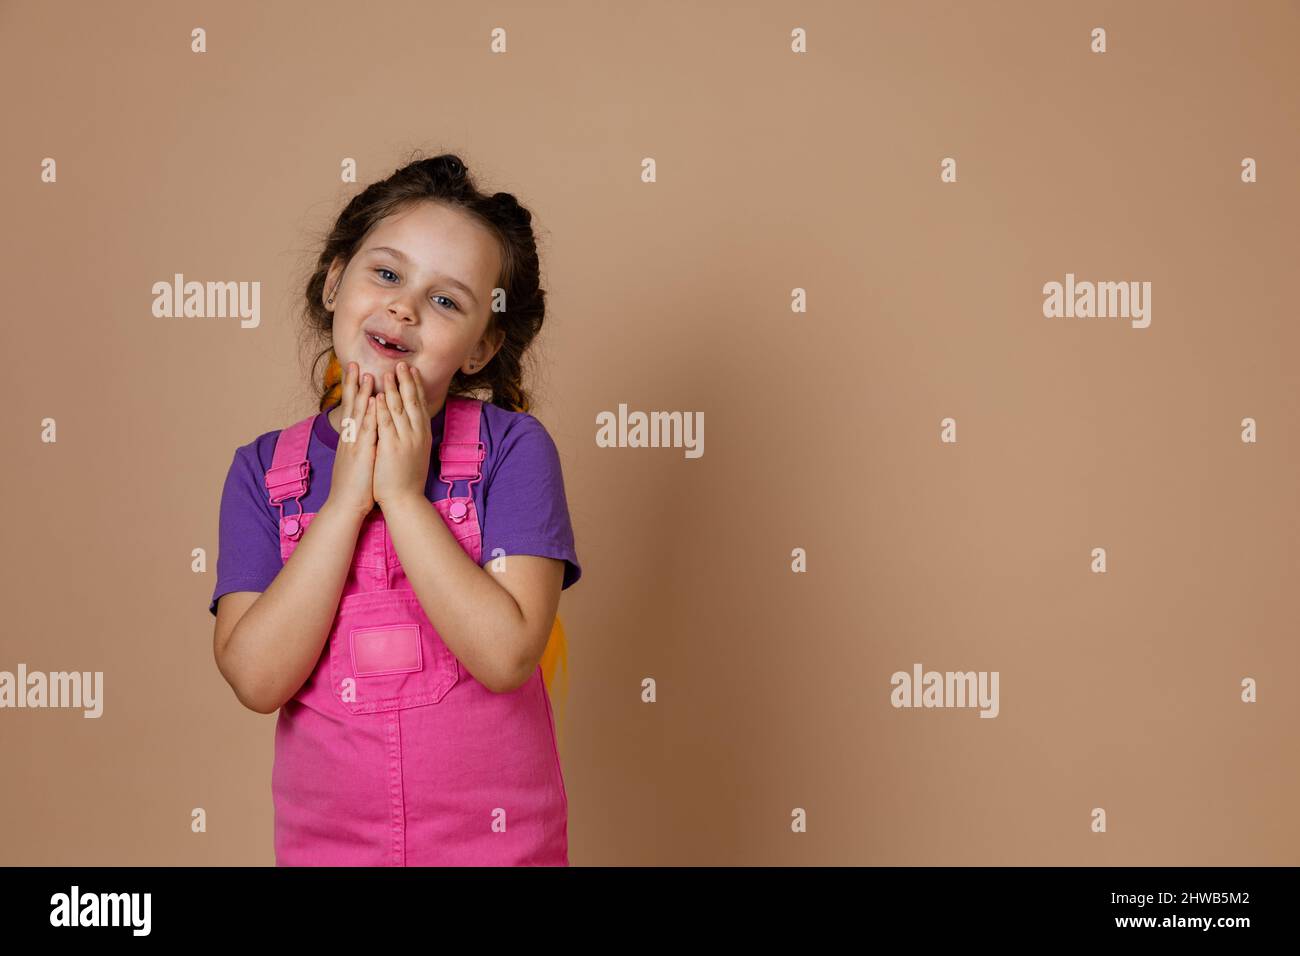 Kind cute, small girl with kanekalon pigtails of yellow color, touching chin with hands looking at camera with gentle smile wearing pink jumpsuit and Stock Photo